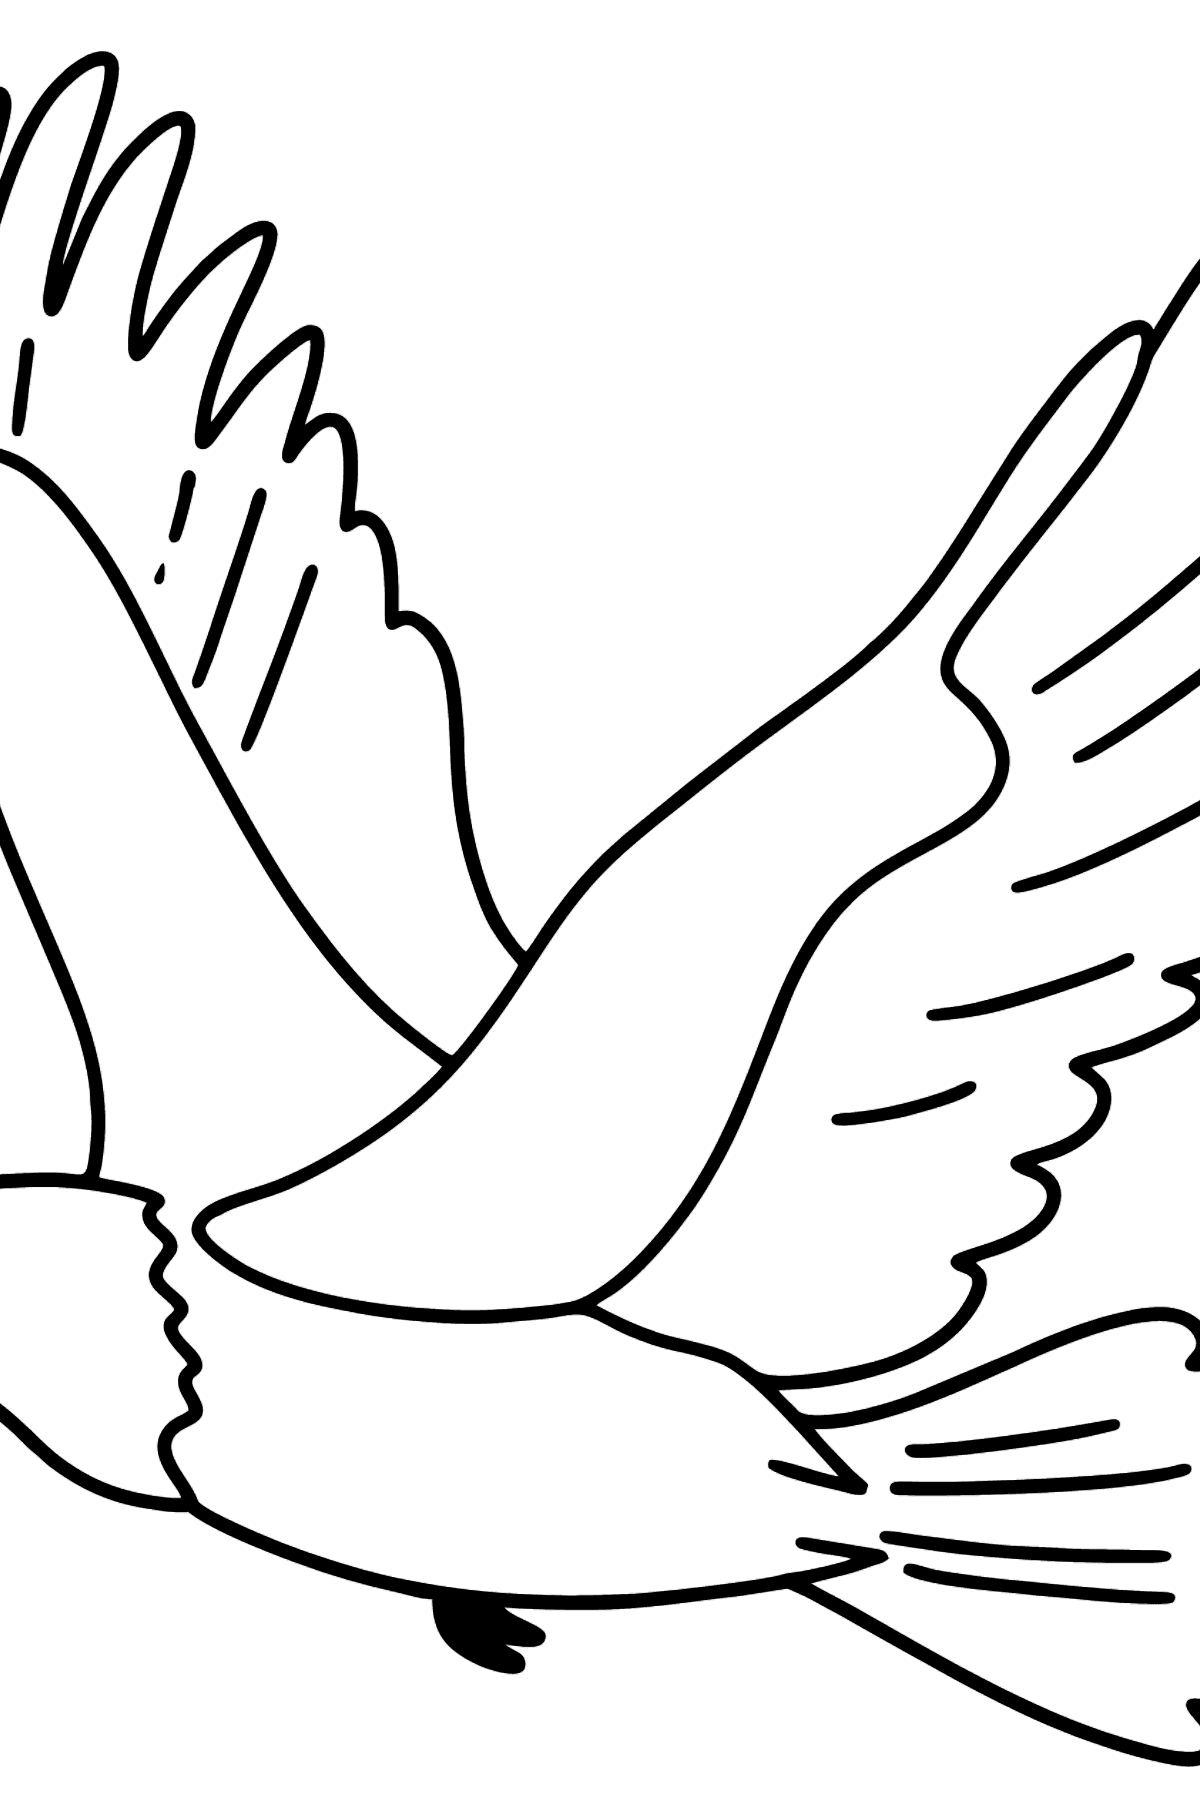 Eagle coloring page - Coloring Pages for Kids